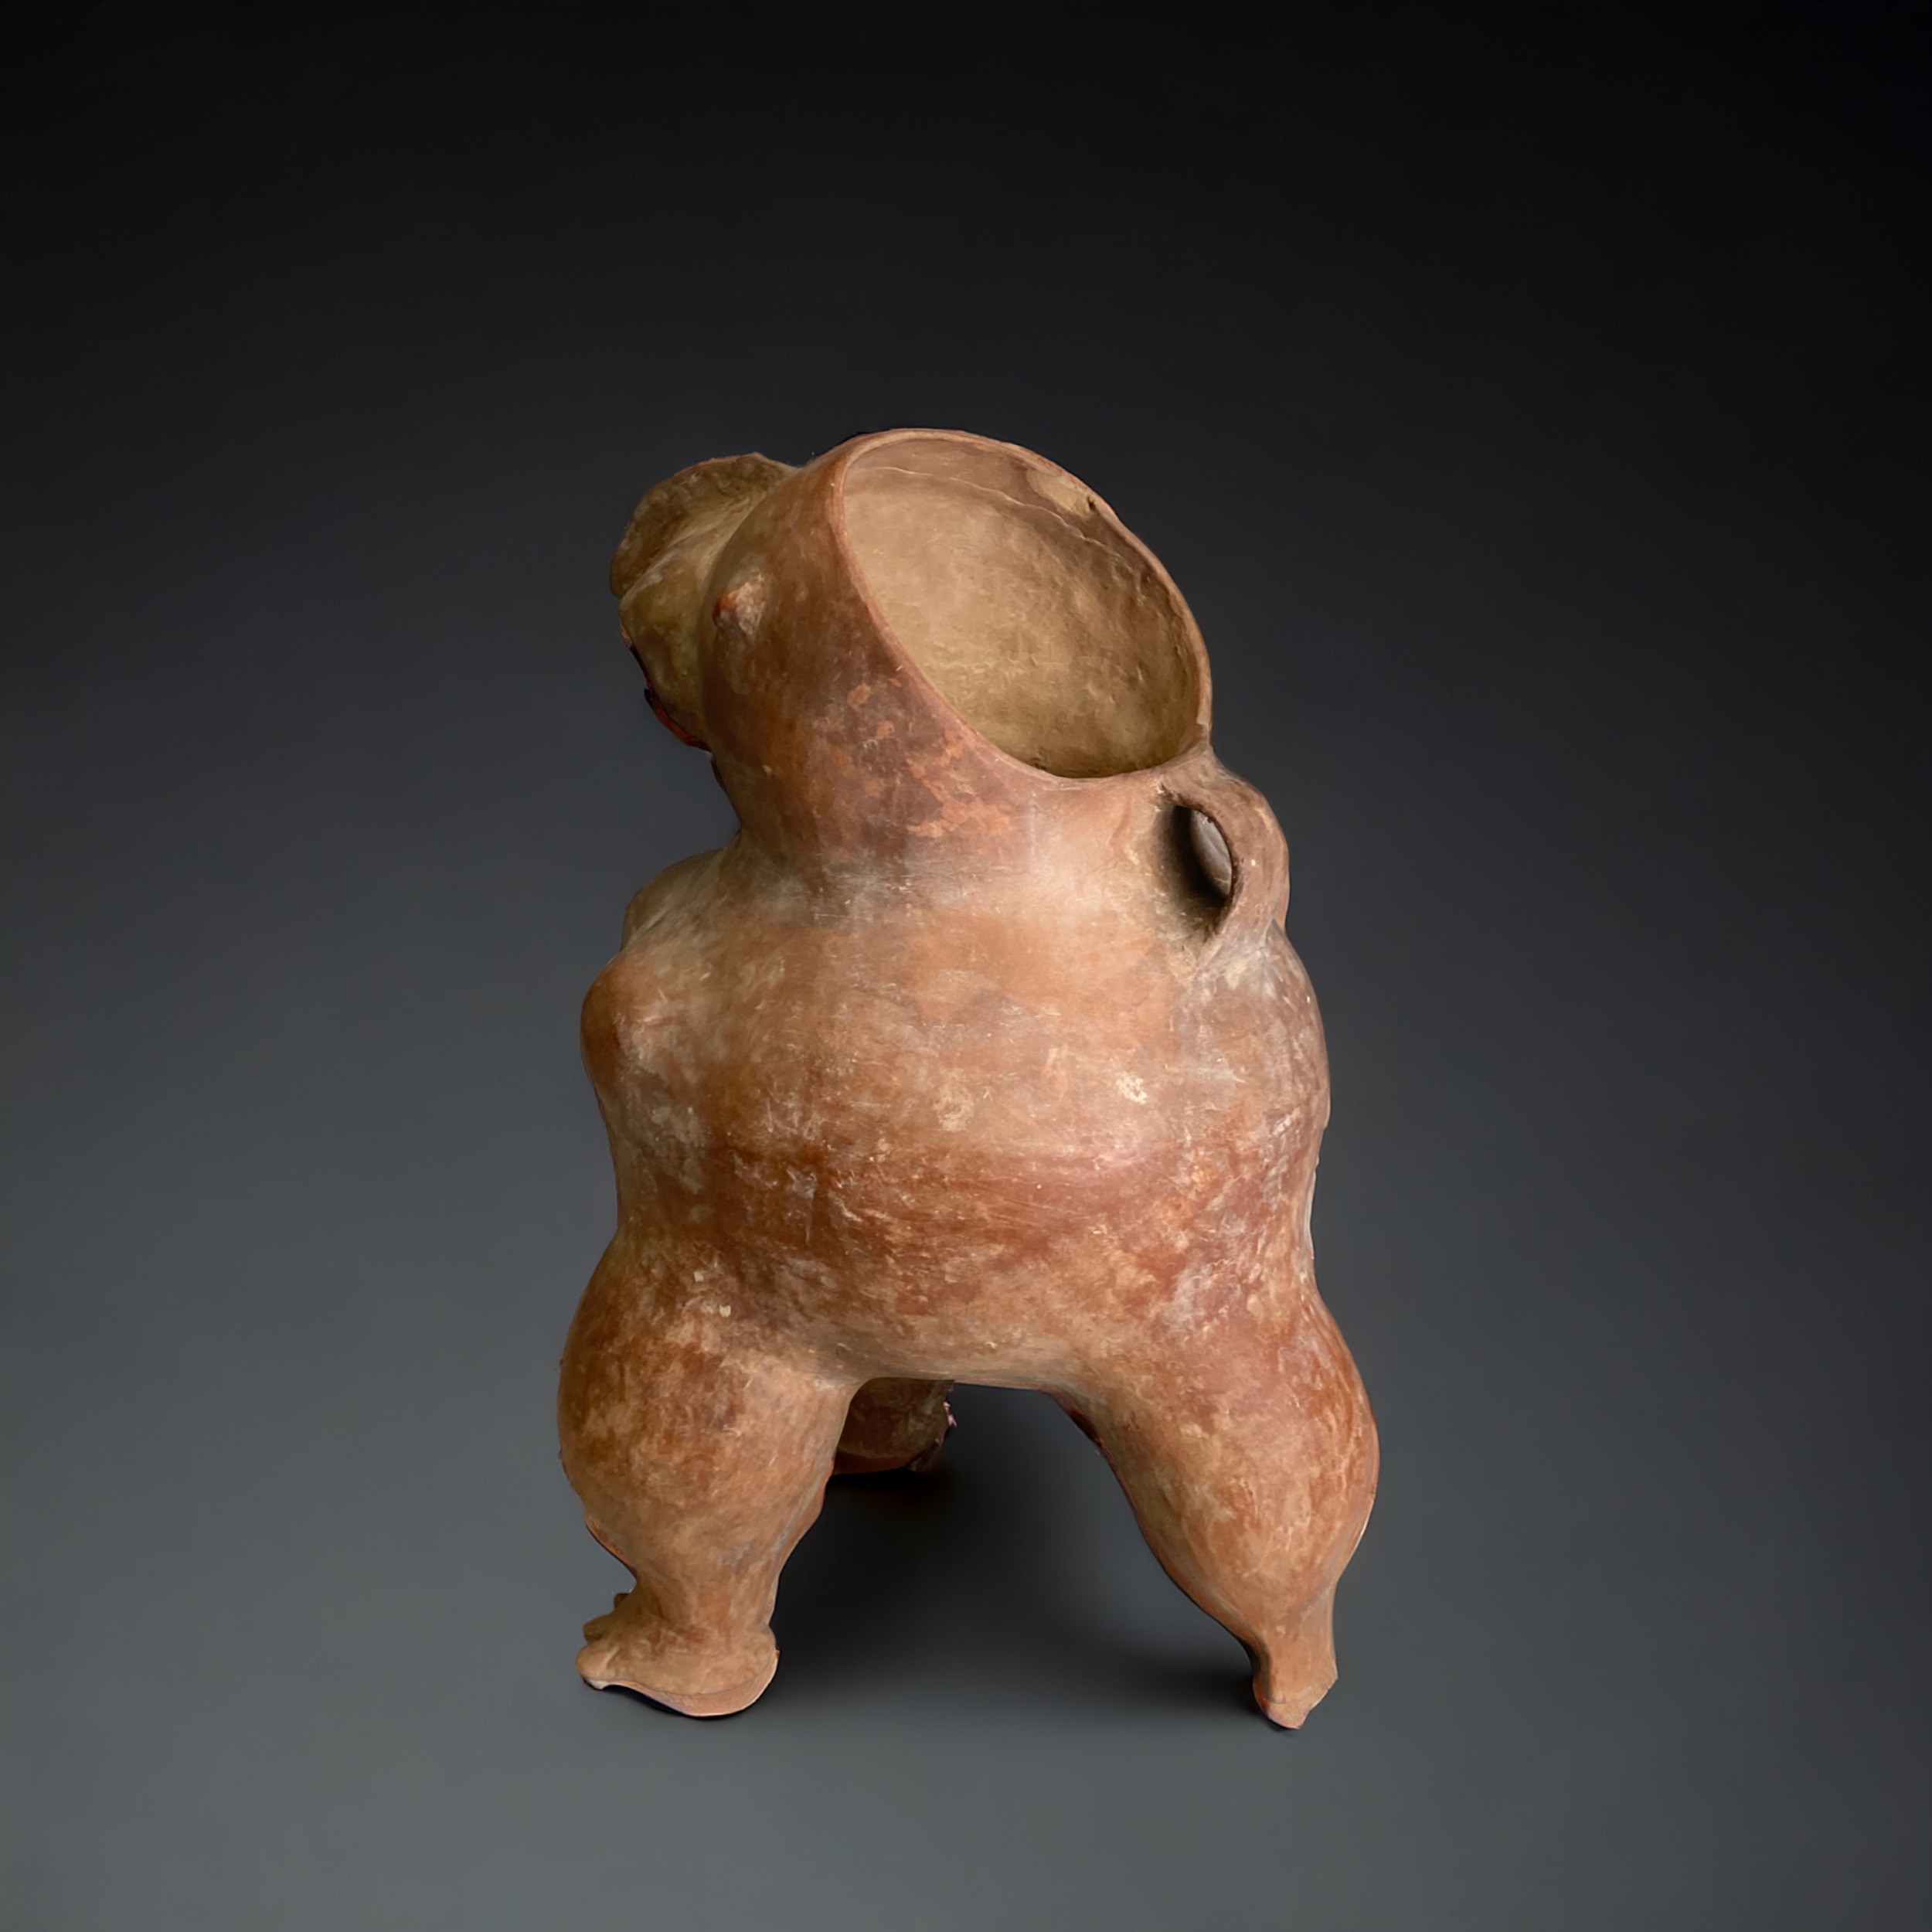 A red Neolithic pottery eagle vessel, Yangshao culture c 4800-4300 BC 仰韶文化 鹰壶 紅陶 - Image 4 of 5